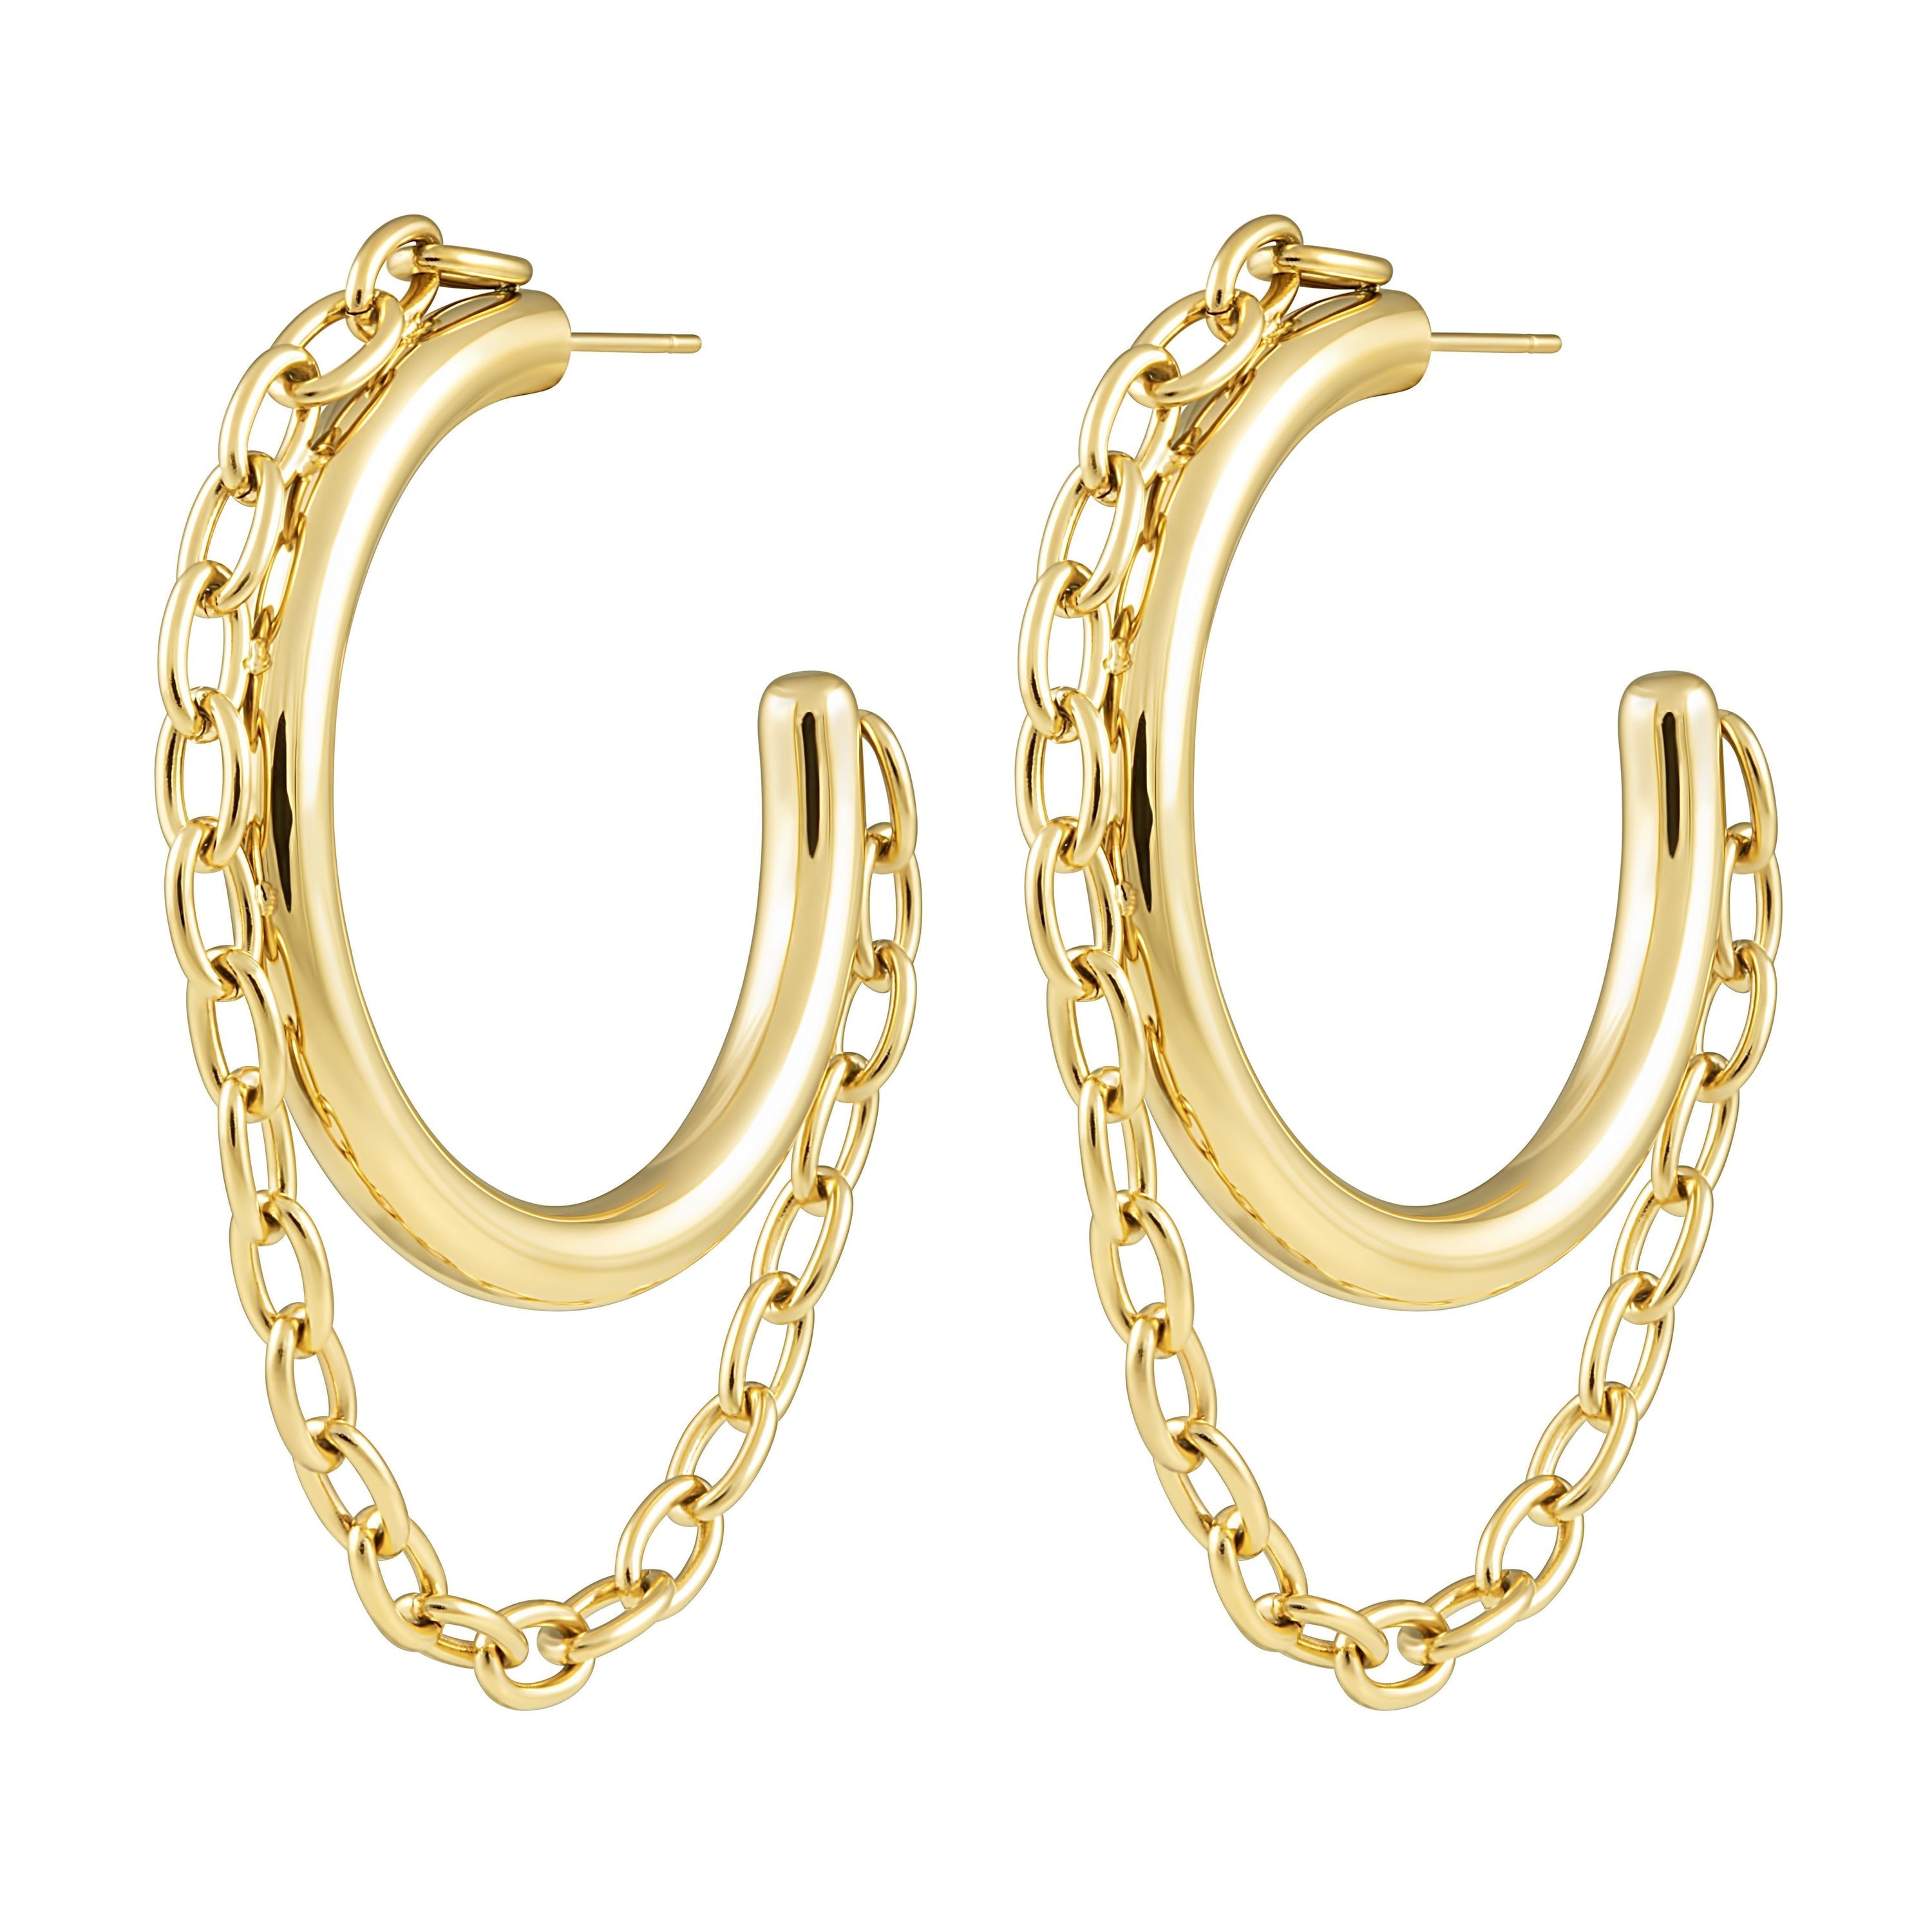 18k Gold Plated Gianna Chain Hoop Earrings - Stainless Steel Chains Bijou Her